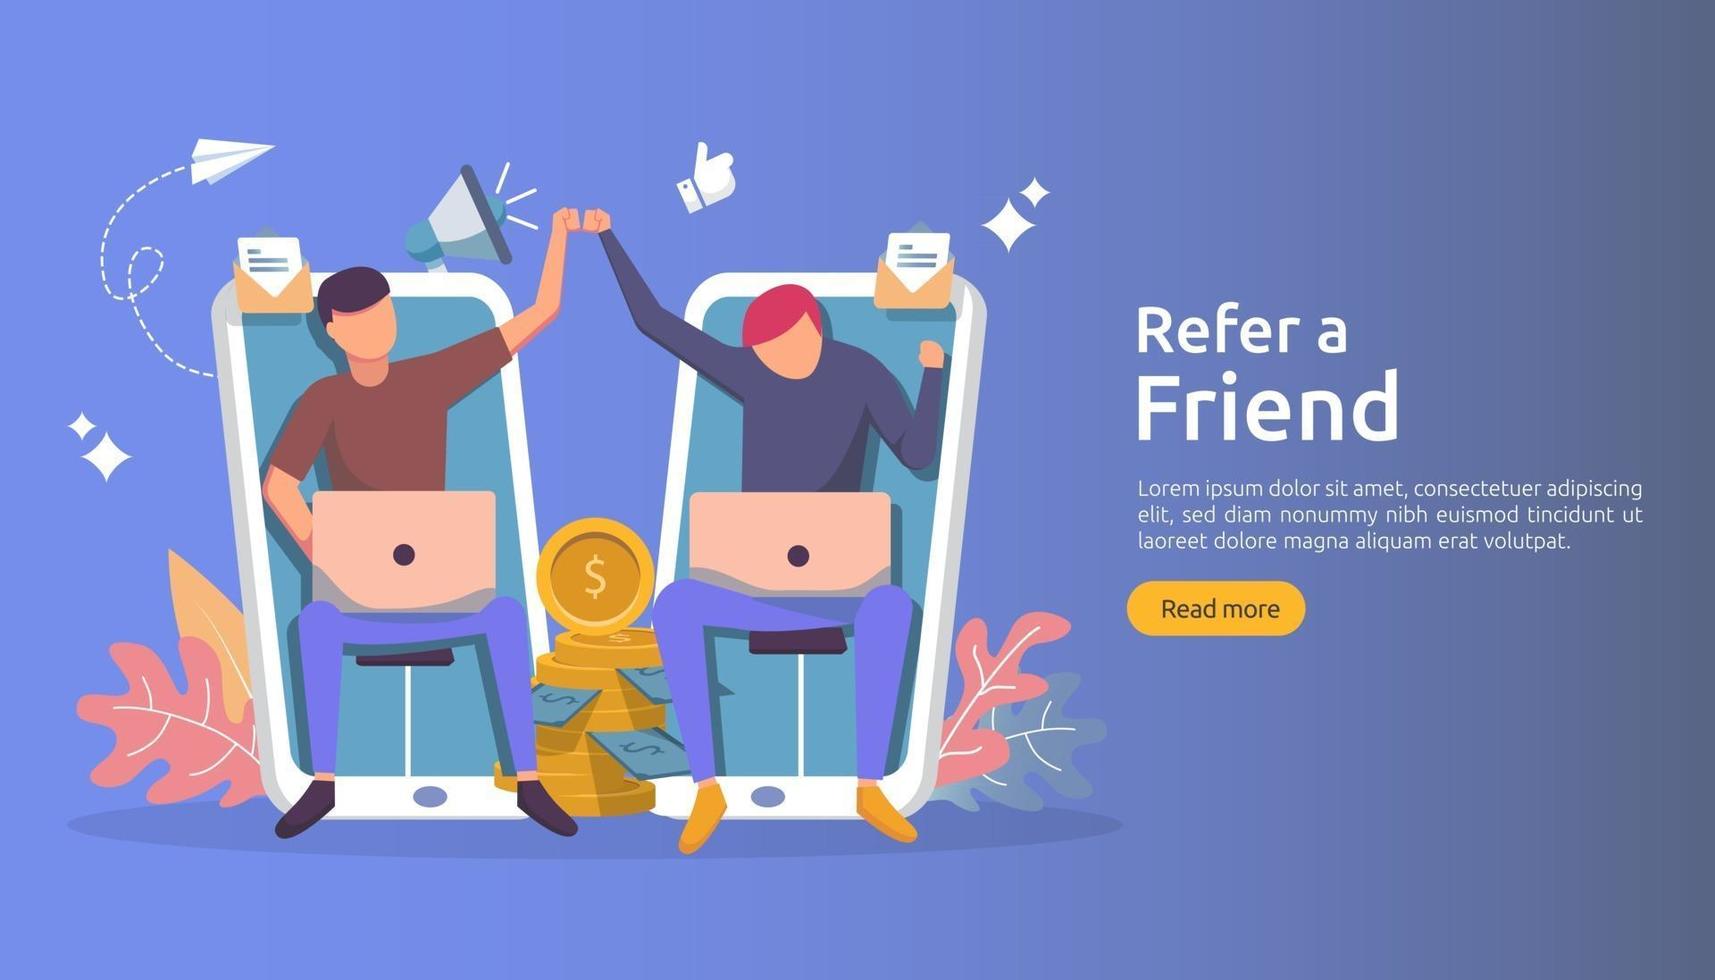 refer a friend affiliate partnership and earn money. marketing concept strategy. people character sharing referral business. template for web landing page, banner, presentation, poster, or print media vector